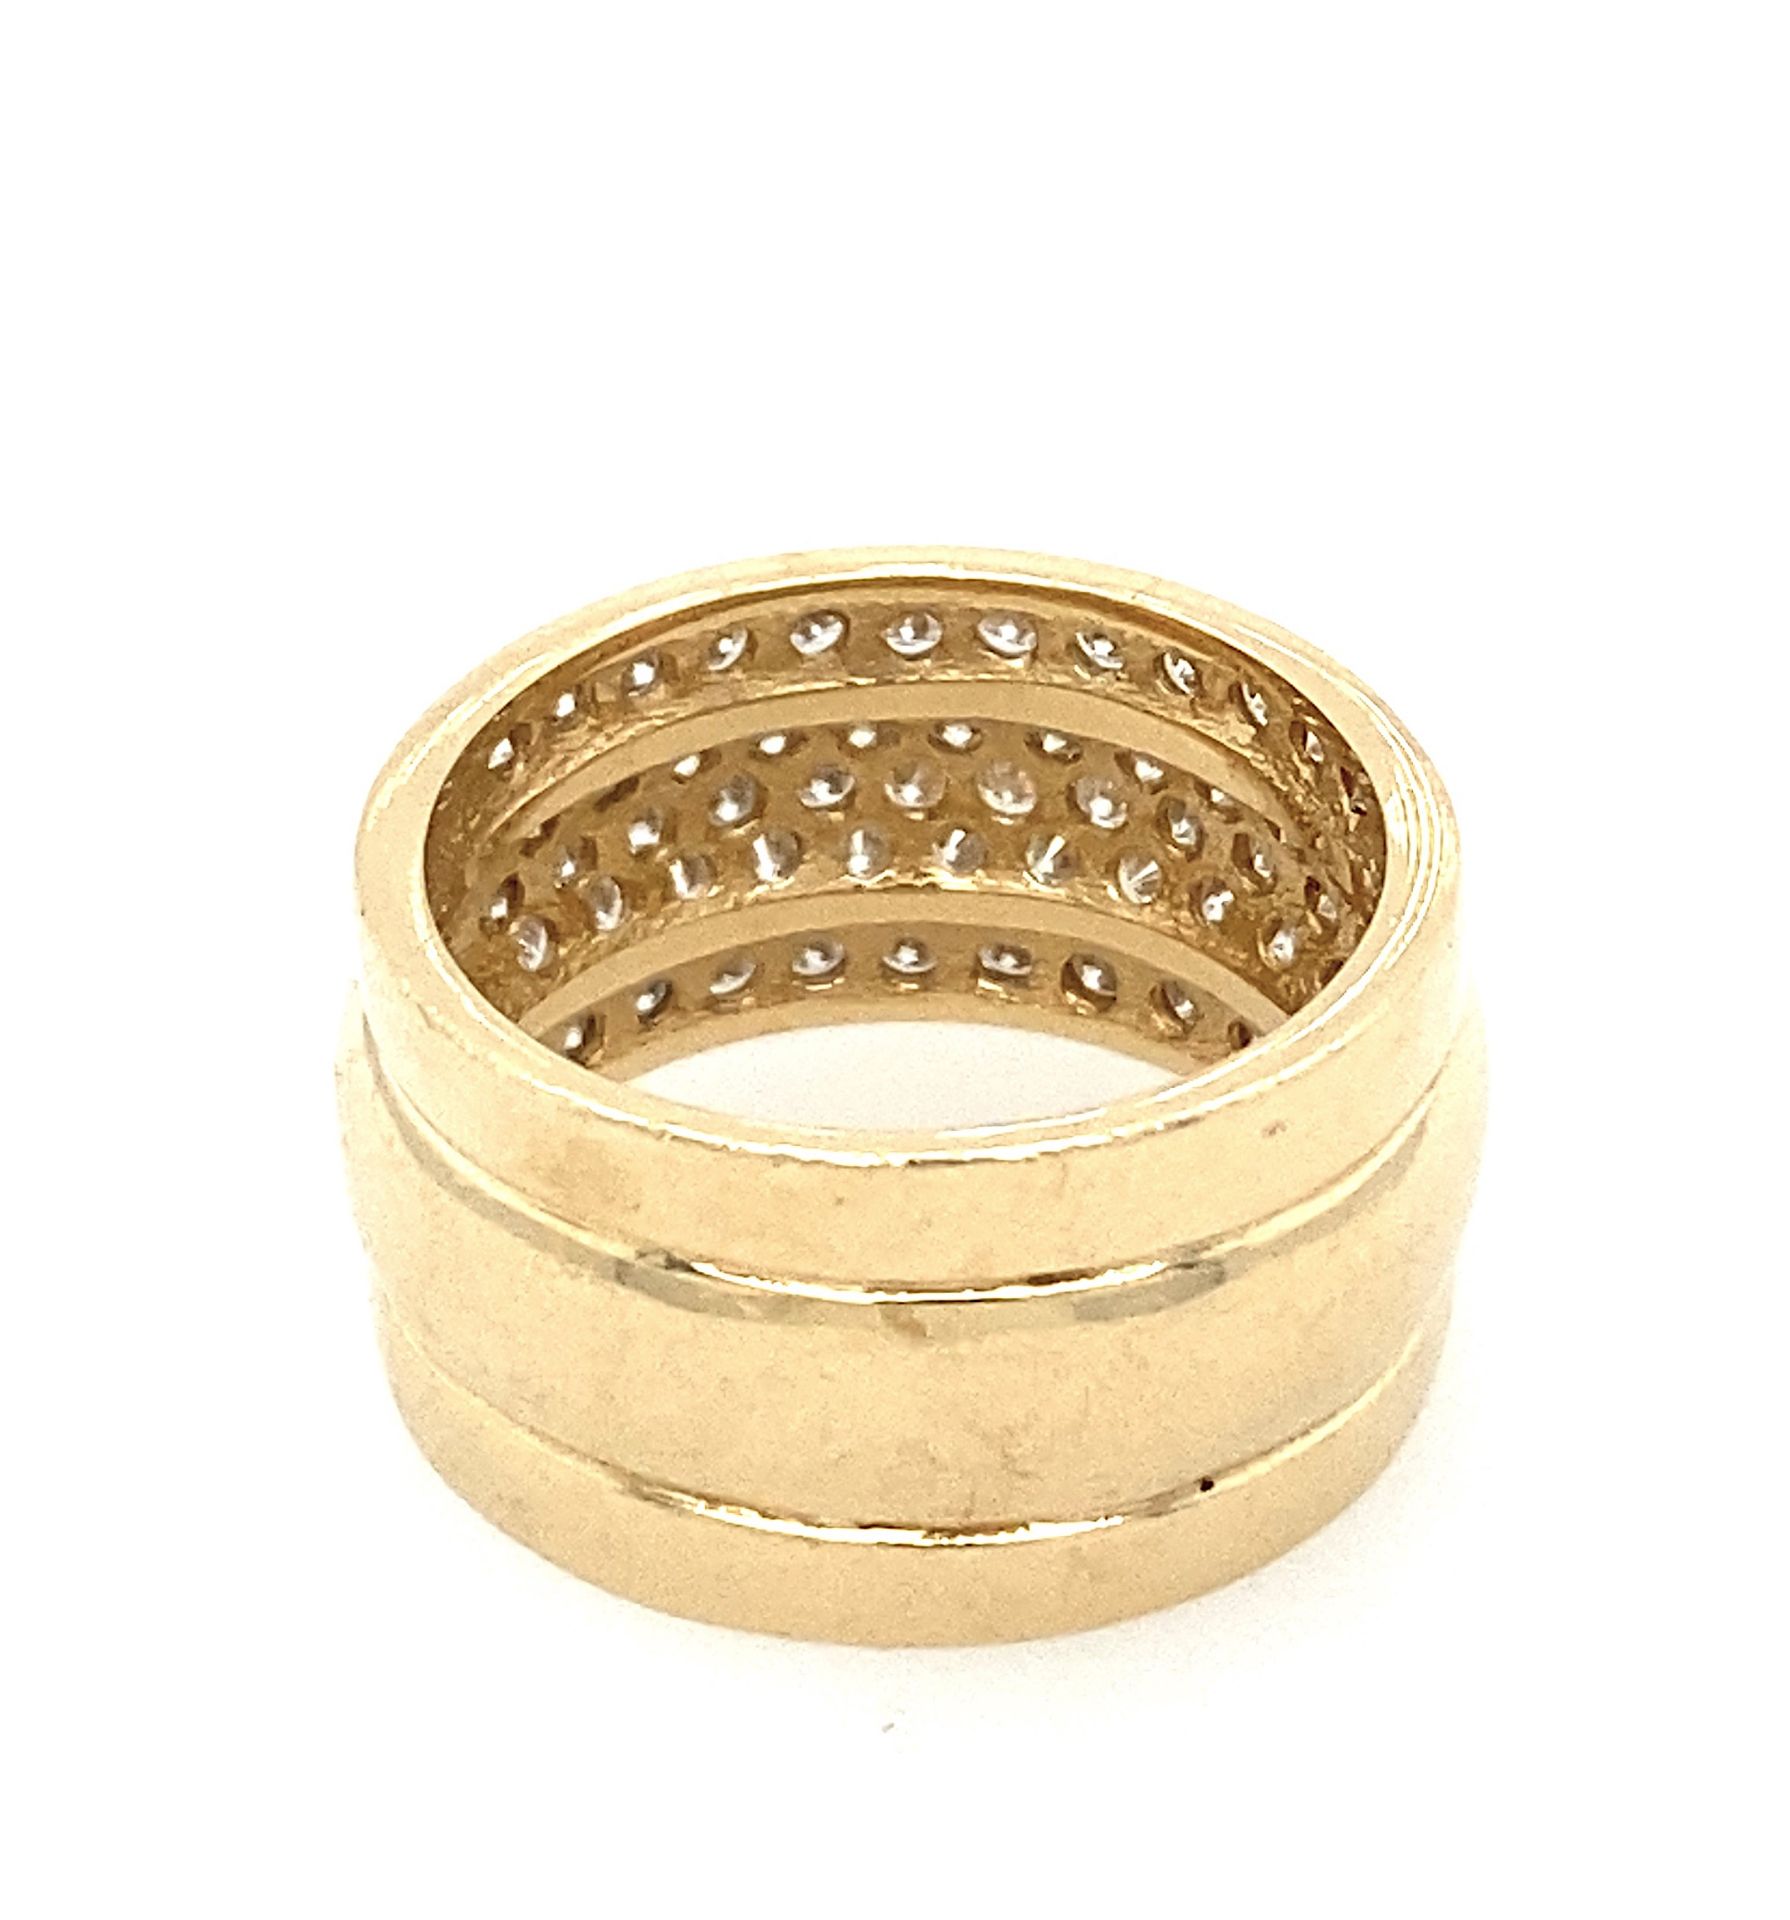 Ring made of 585 gold with total ca. 1,3 ct - Image 4 of 4